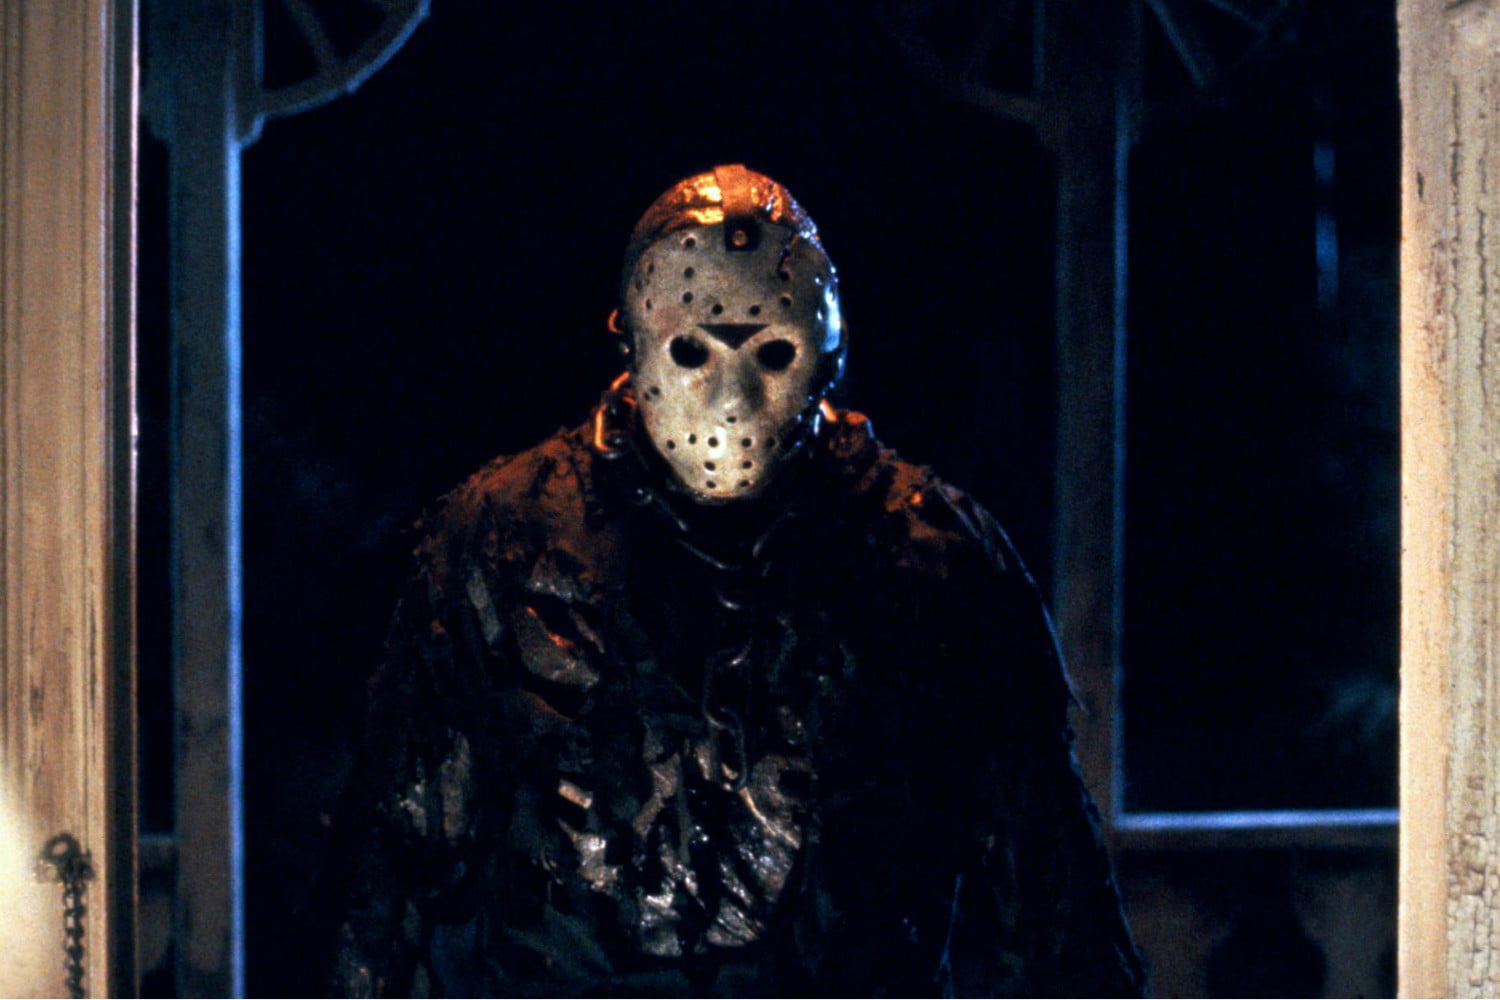 brad farrer recommends Jason Voorhees Pictures